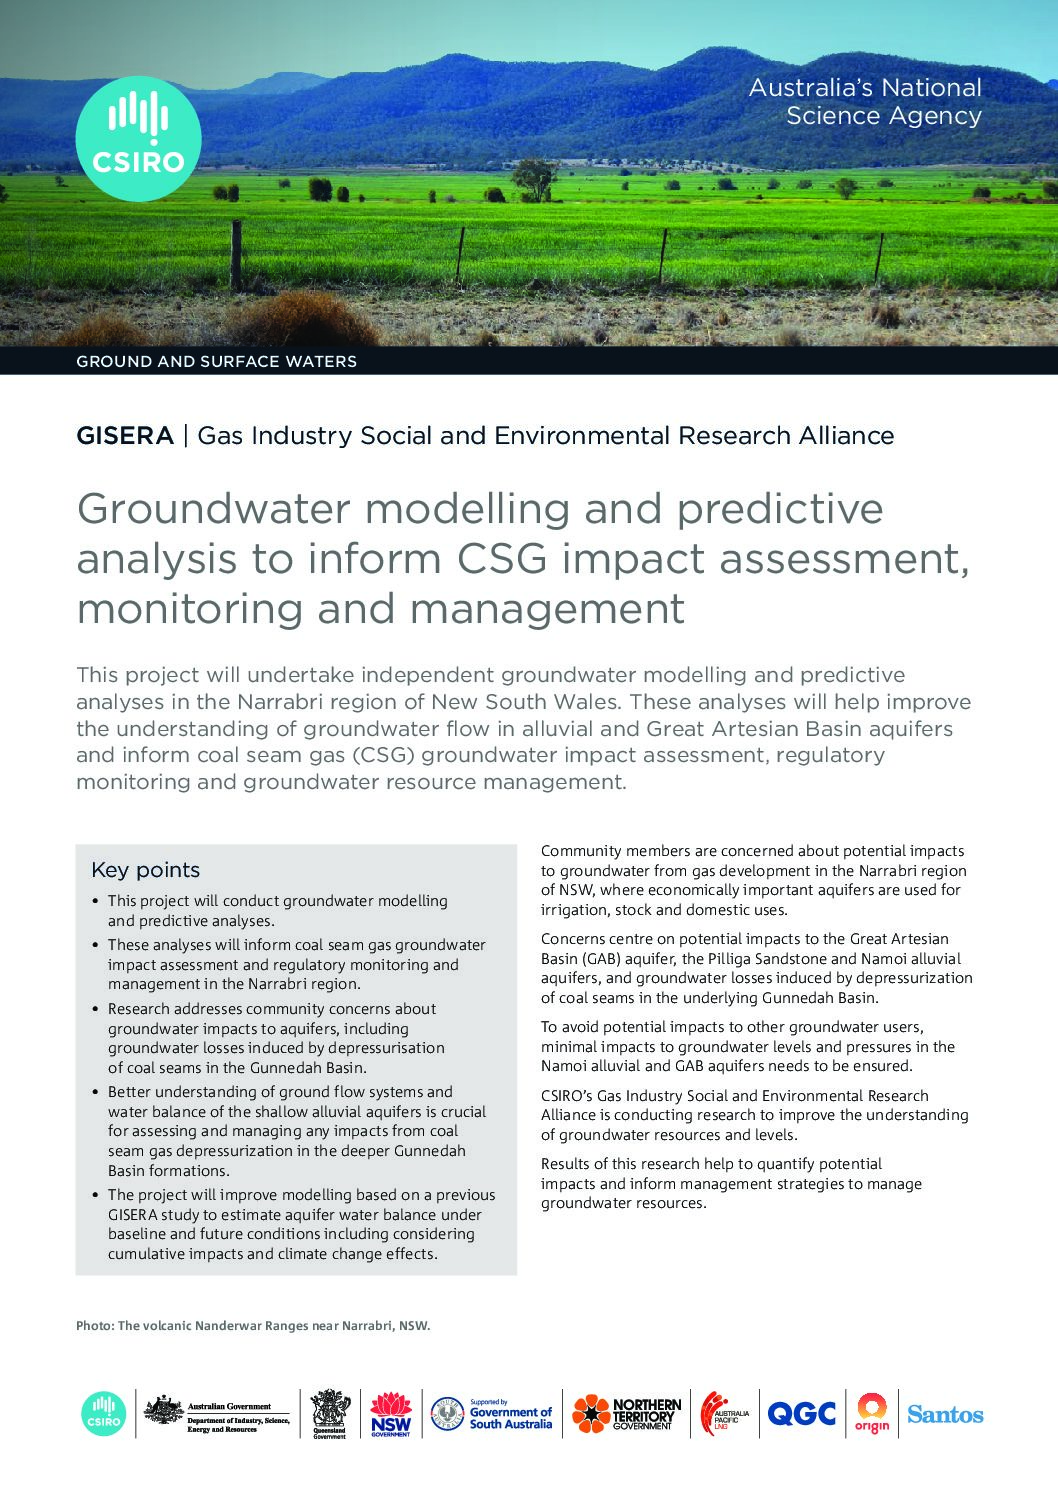 Regional-scale modelling and predictive uncertainty analysis of cumulative  groundwater impacts from coal seam gas and coal mining developments